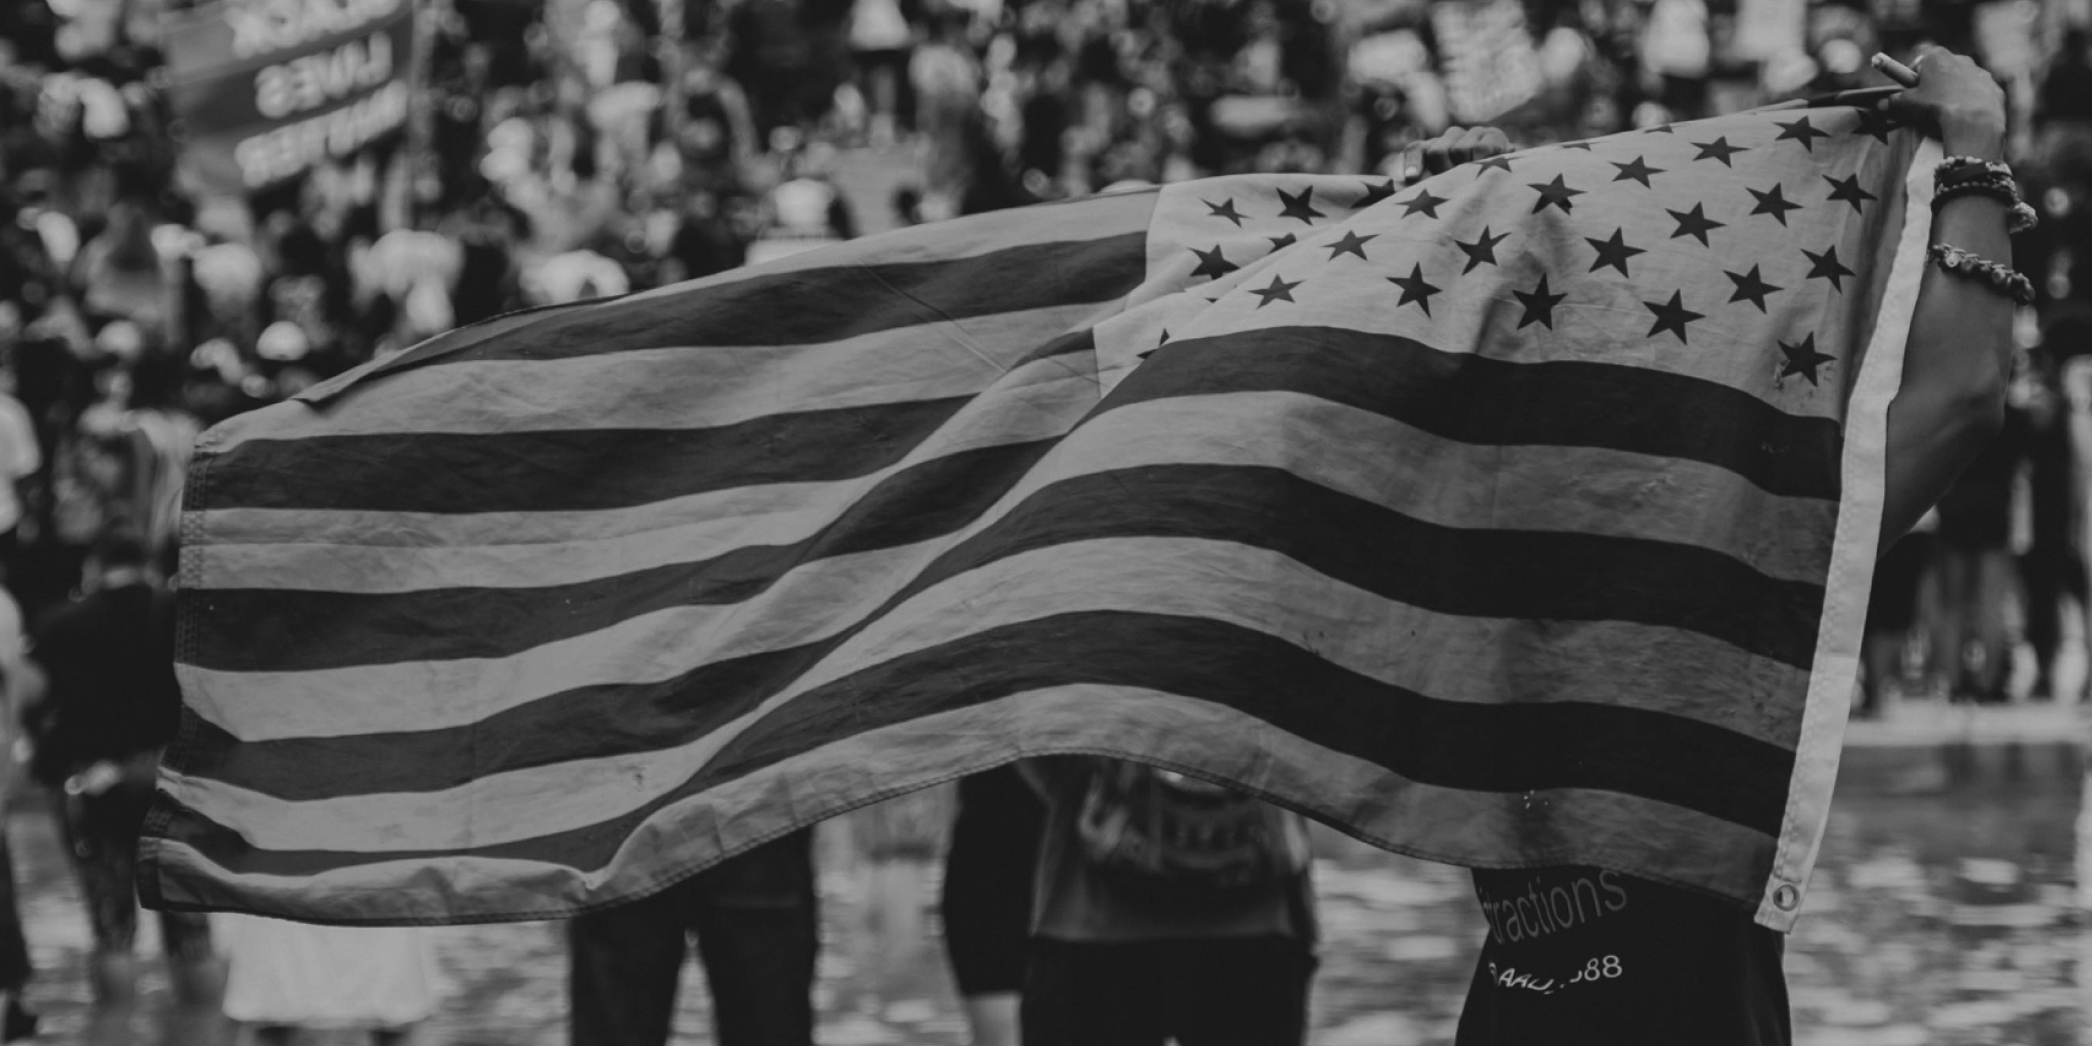 Black and white close up of the American flag being held up at a BLM march in Washington, D.C.